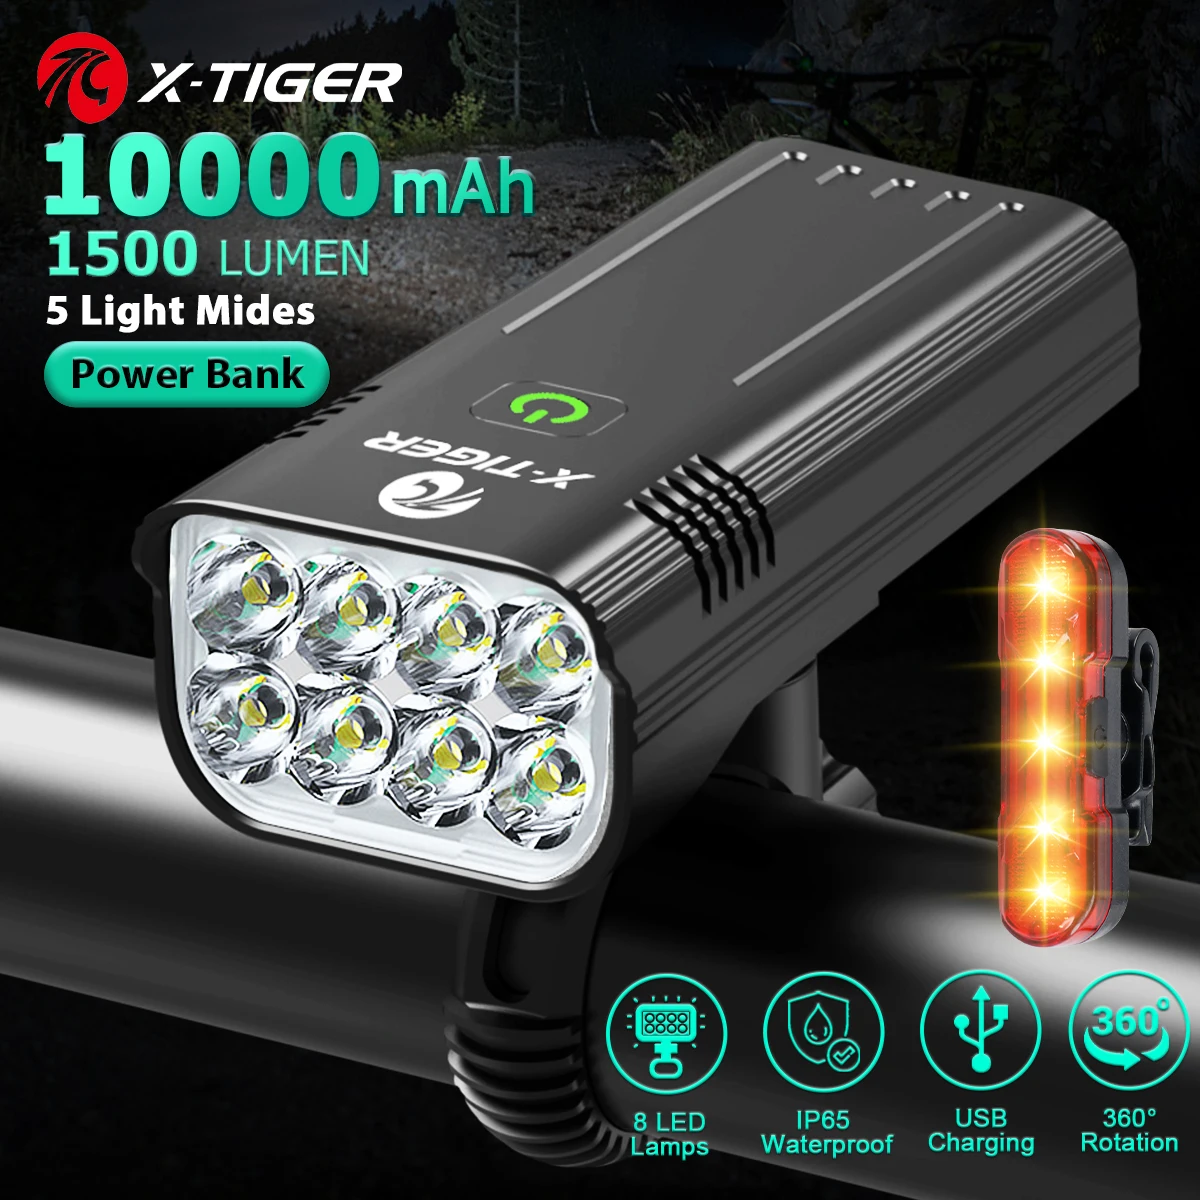 

X-TIGER Bike Light Set Powerful USB Rechargeable Bright 8 LED 10000mAh Bicycle Front Lights IPX5 Waterproof Front Lamp Taillight